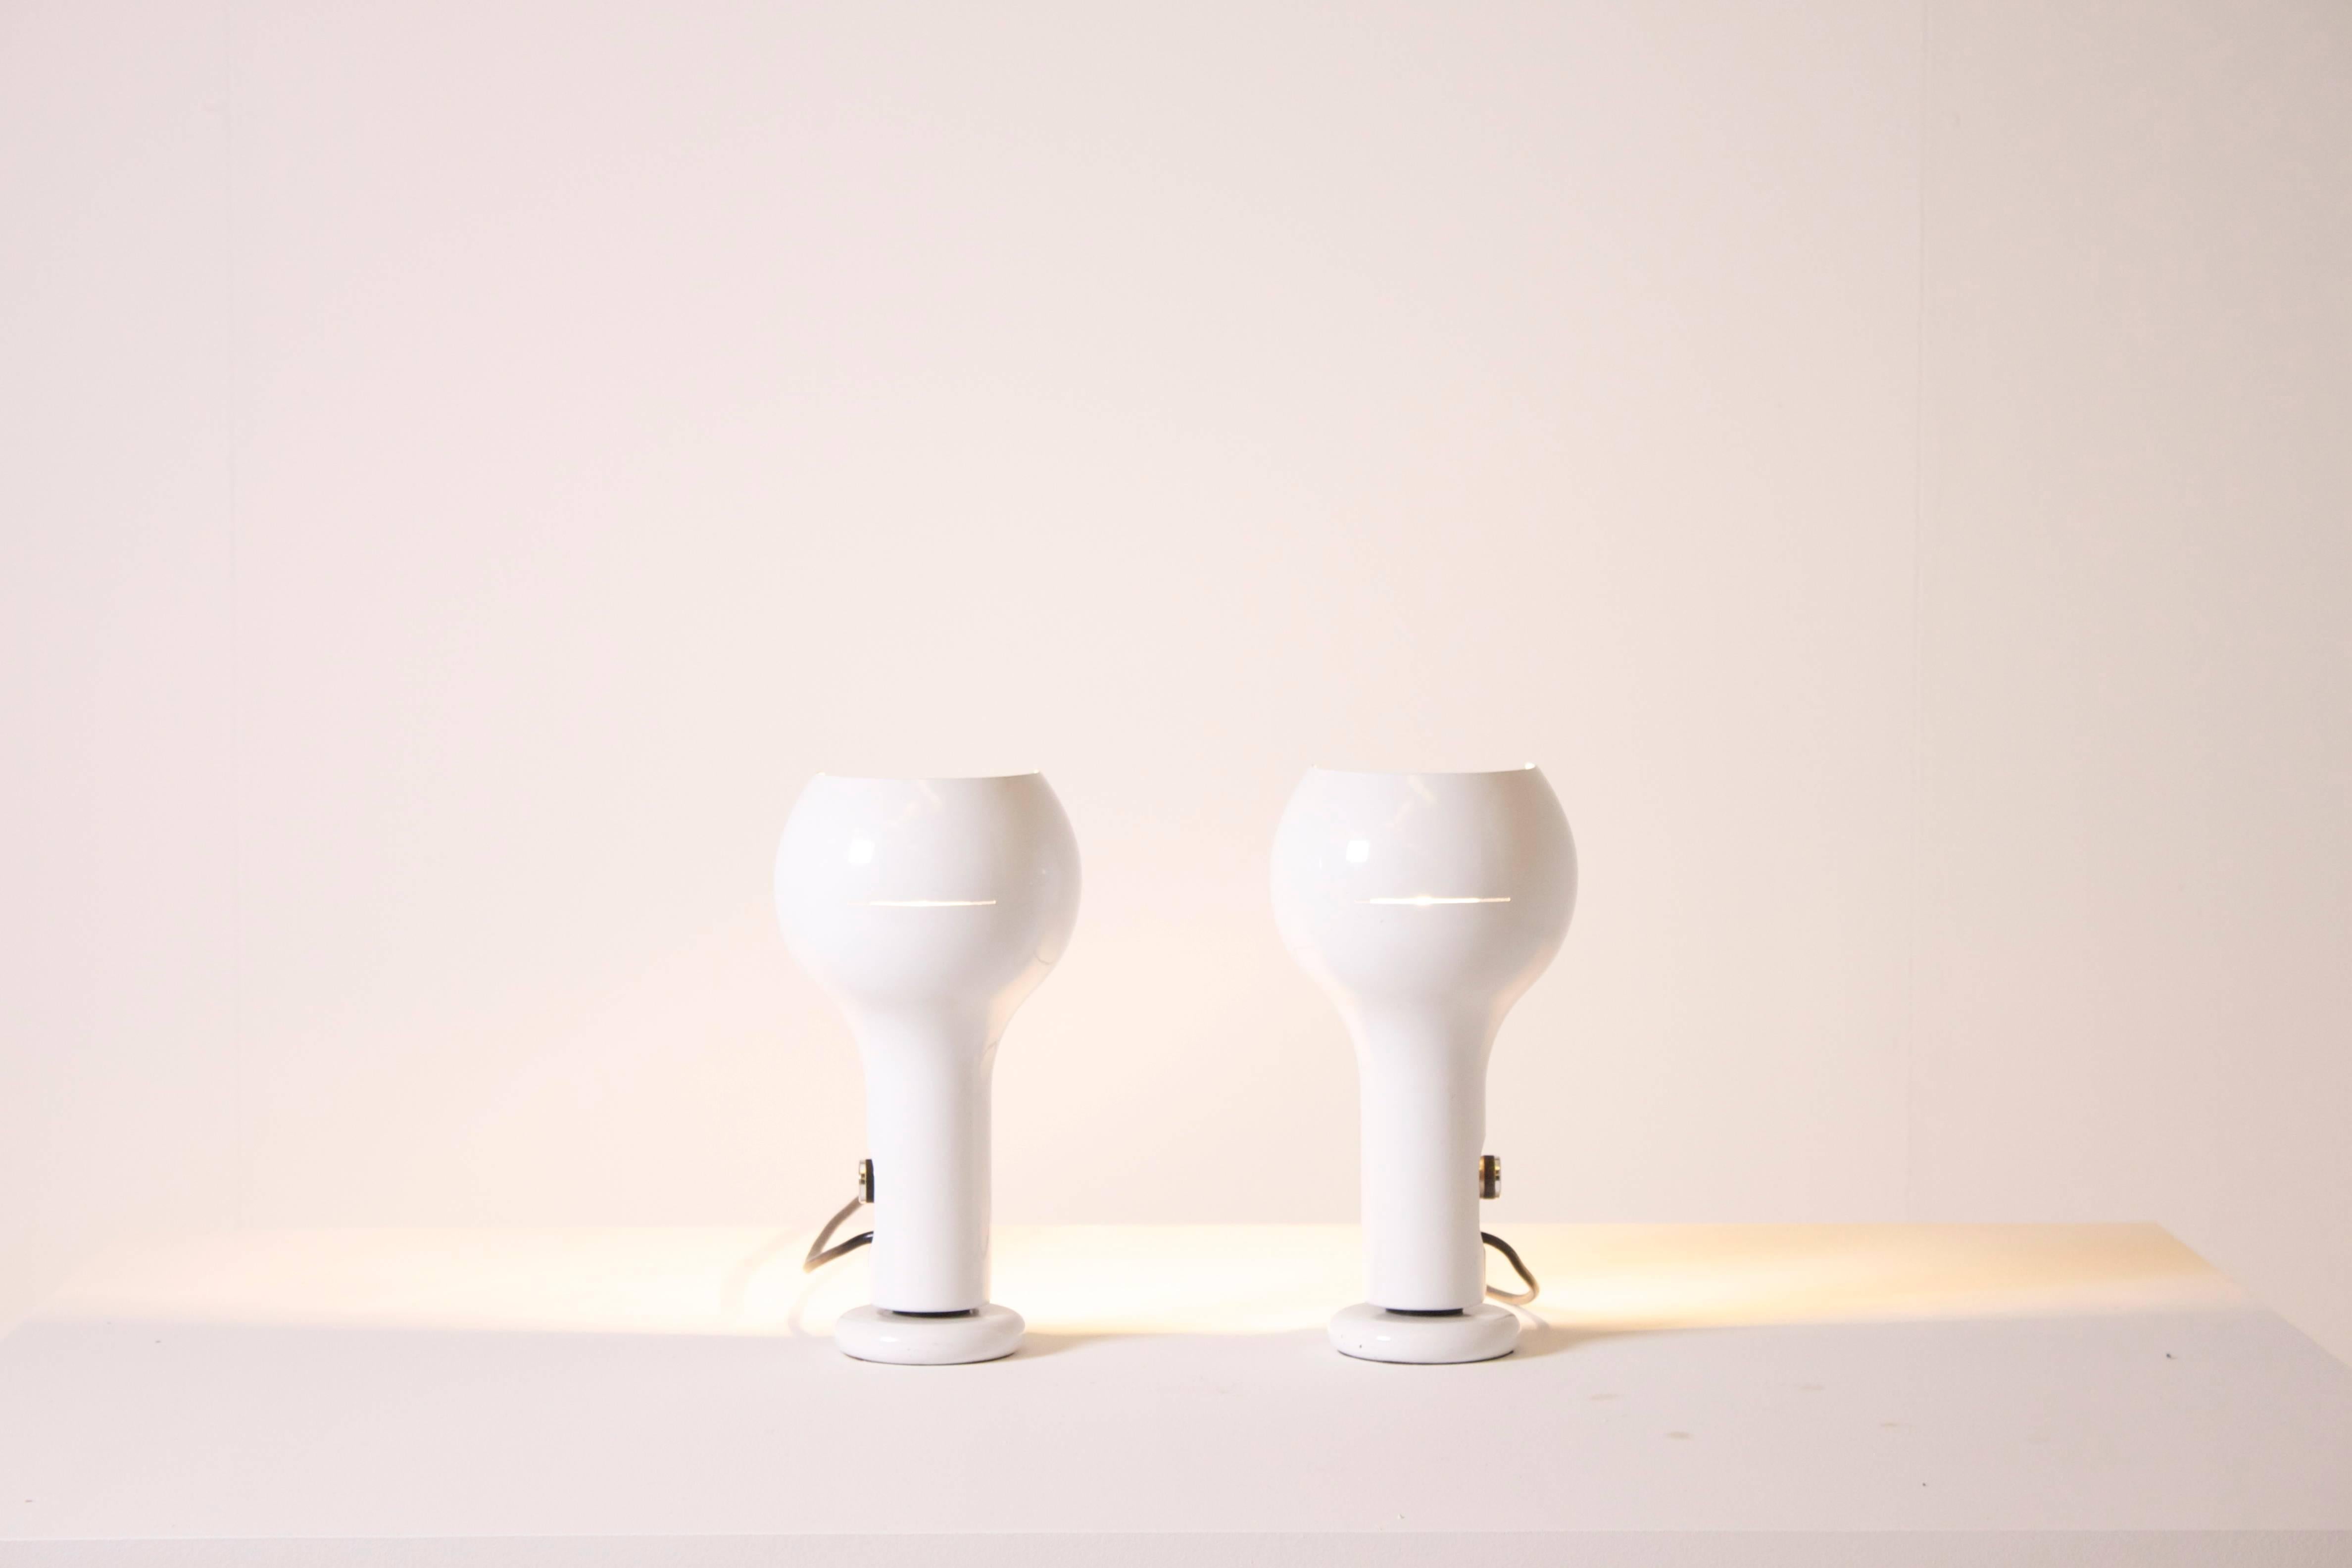 Early edition 2207 flash table lamps by Joe Colombo.

Manufactured by Oluce, Milan.

White lacquered metal.

Built in dimmer switch.

If you have any questions, please feel free to contact us.